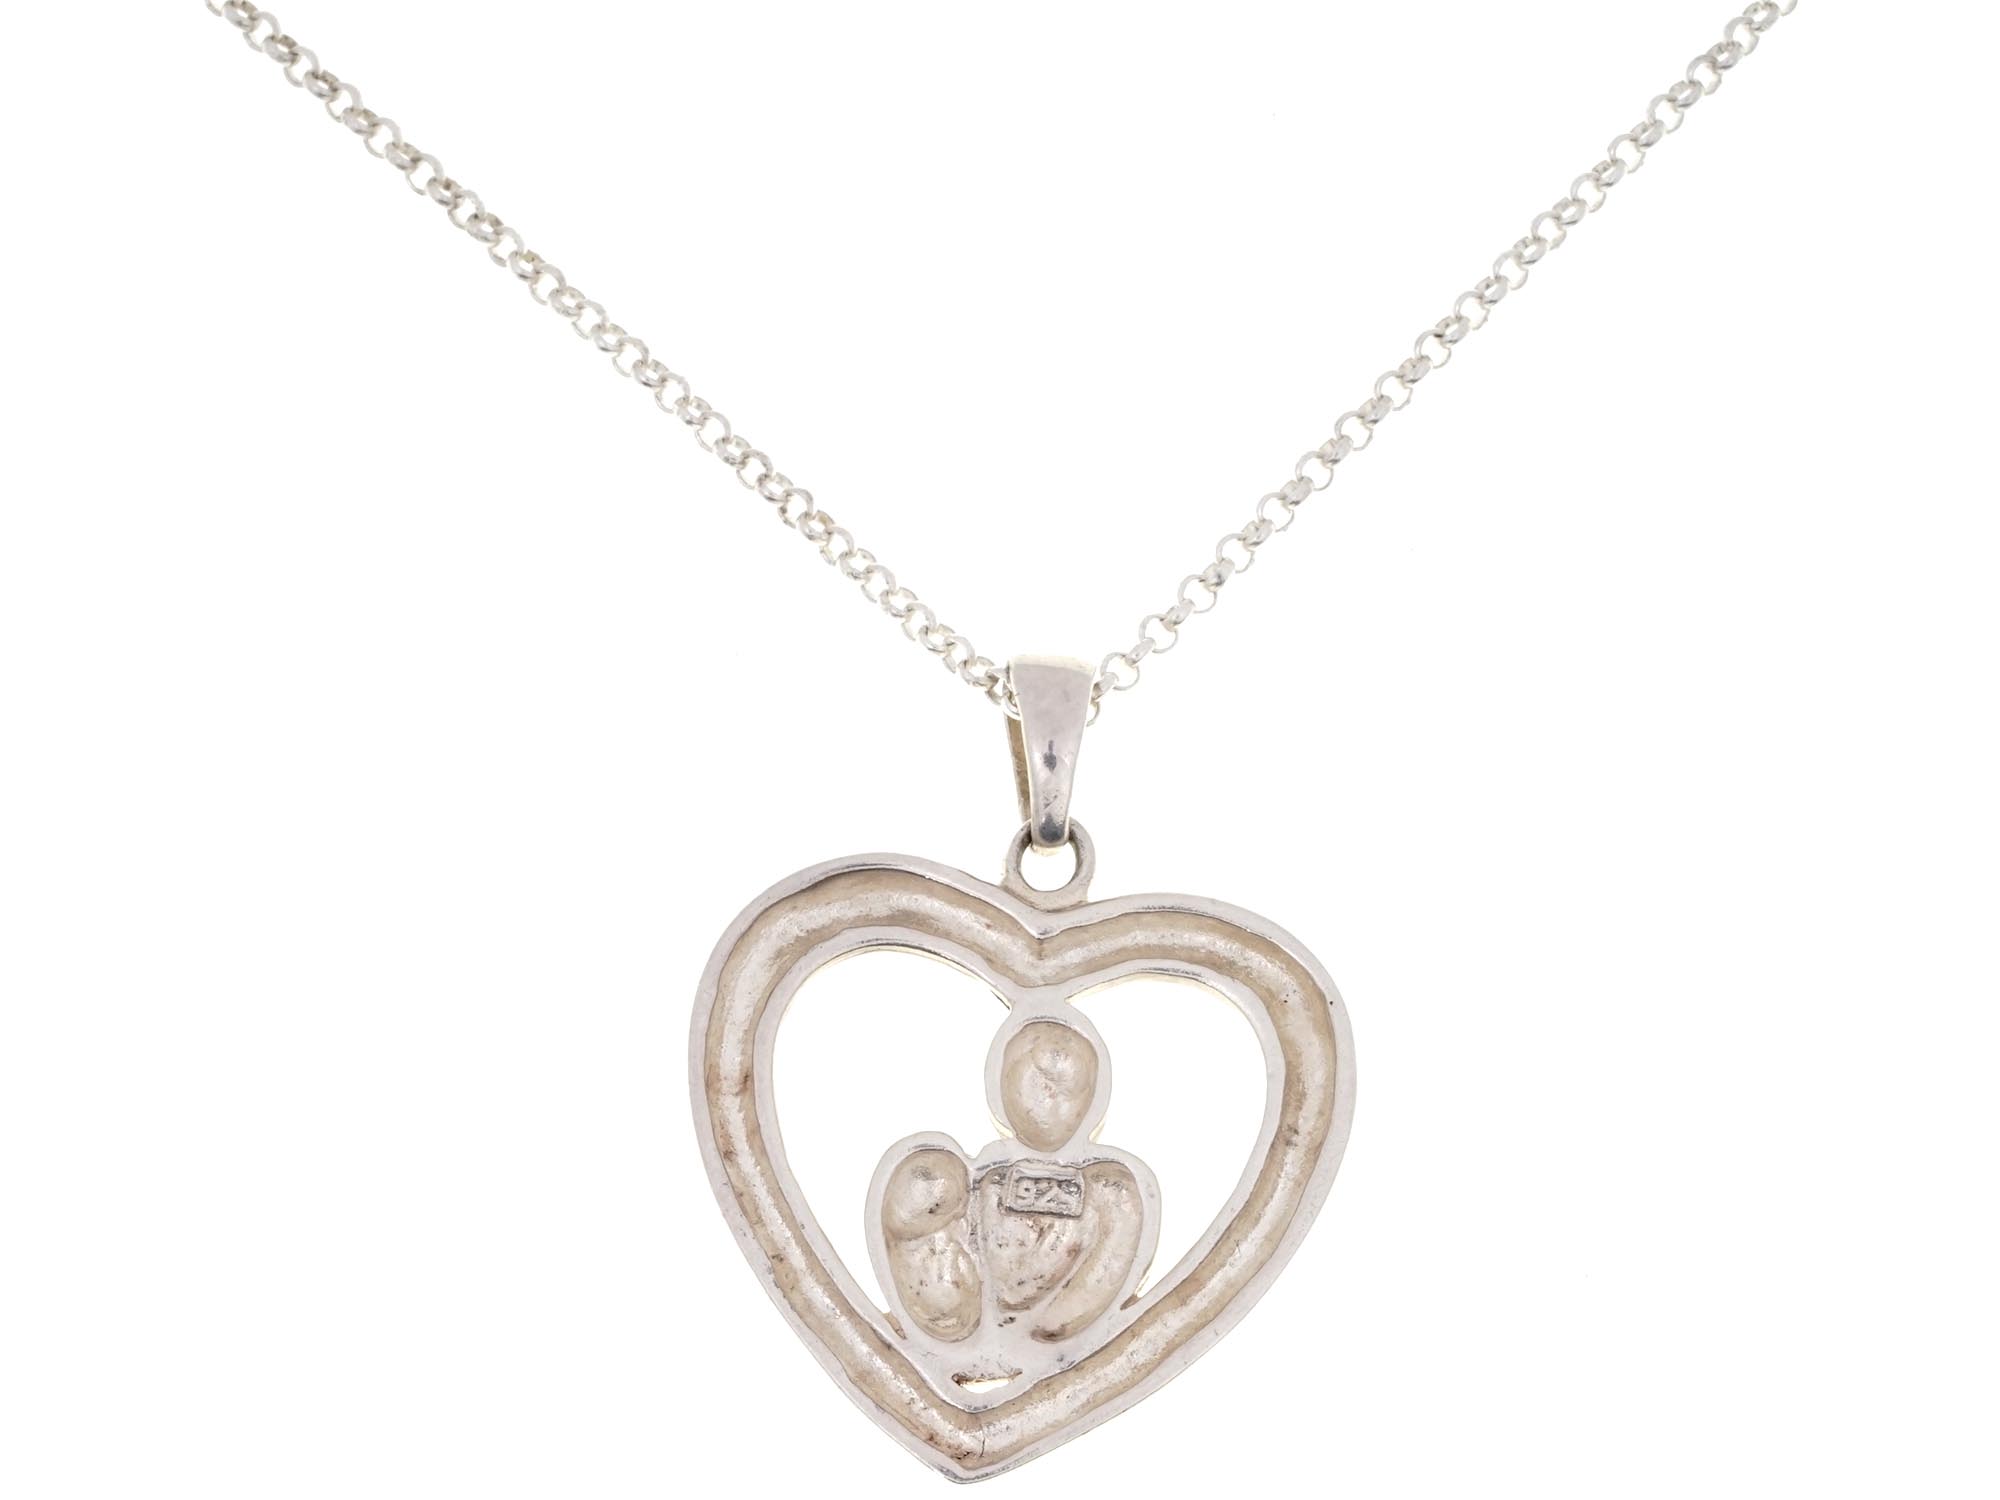 ITALIAN STERLING SILVER HEART PENDANT WITH CHAIN PIC-2